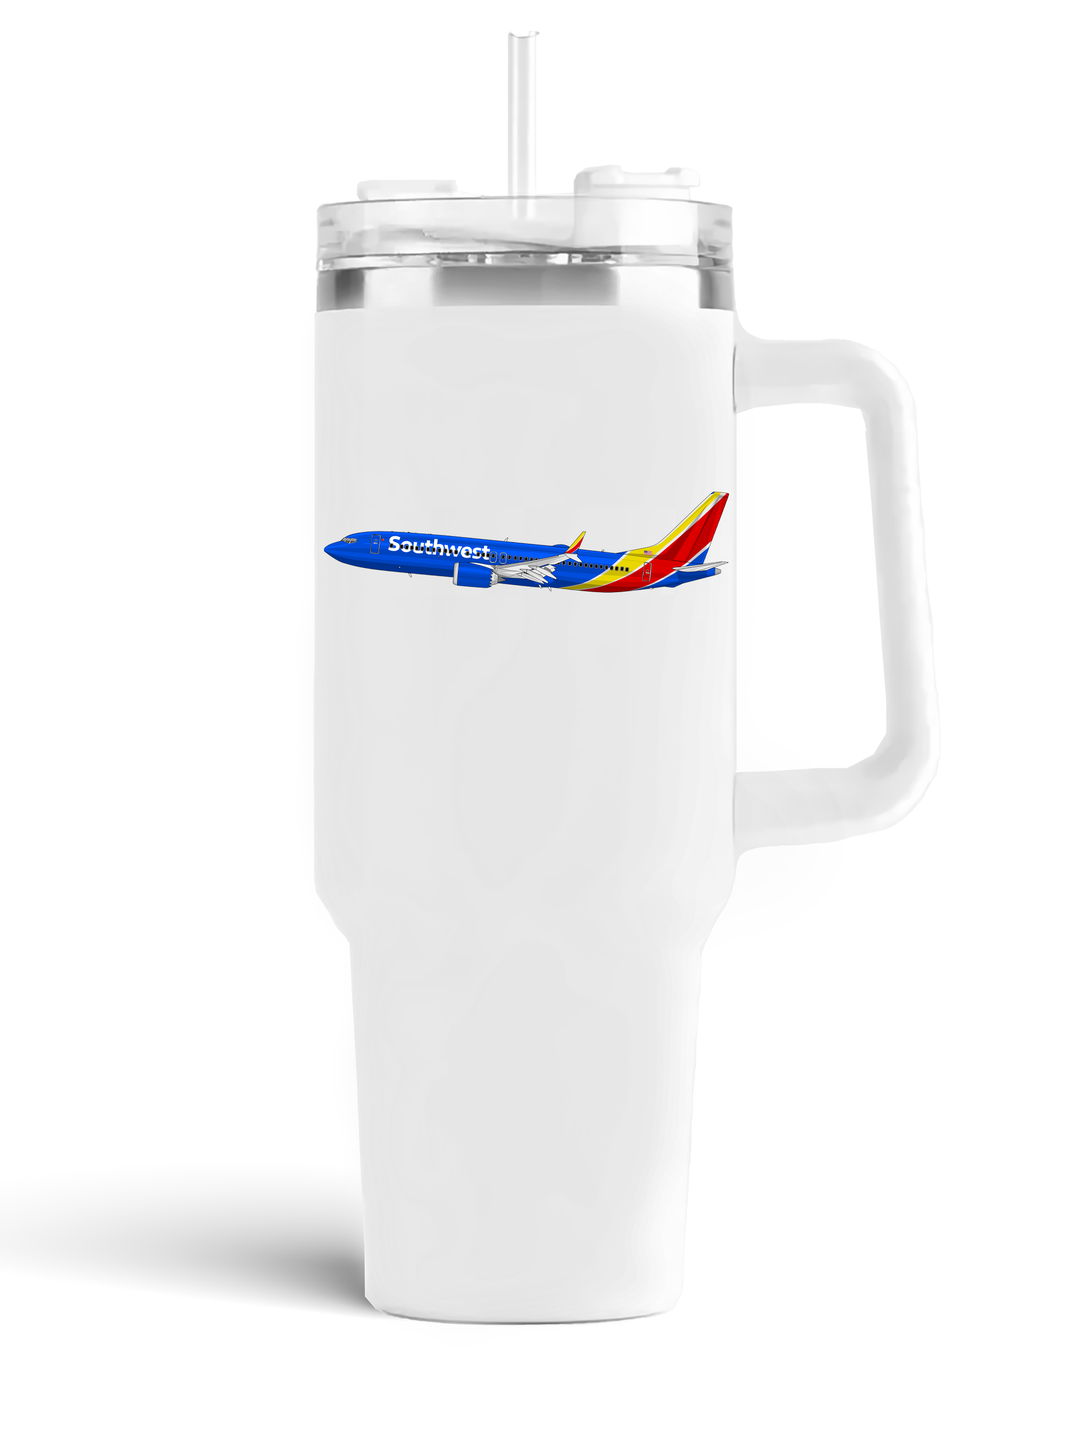 Southwest Airlines Boeing 737 MAX Quencher